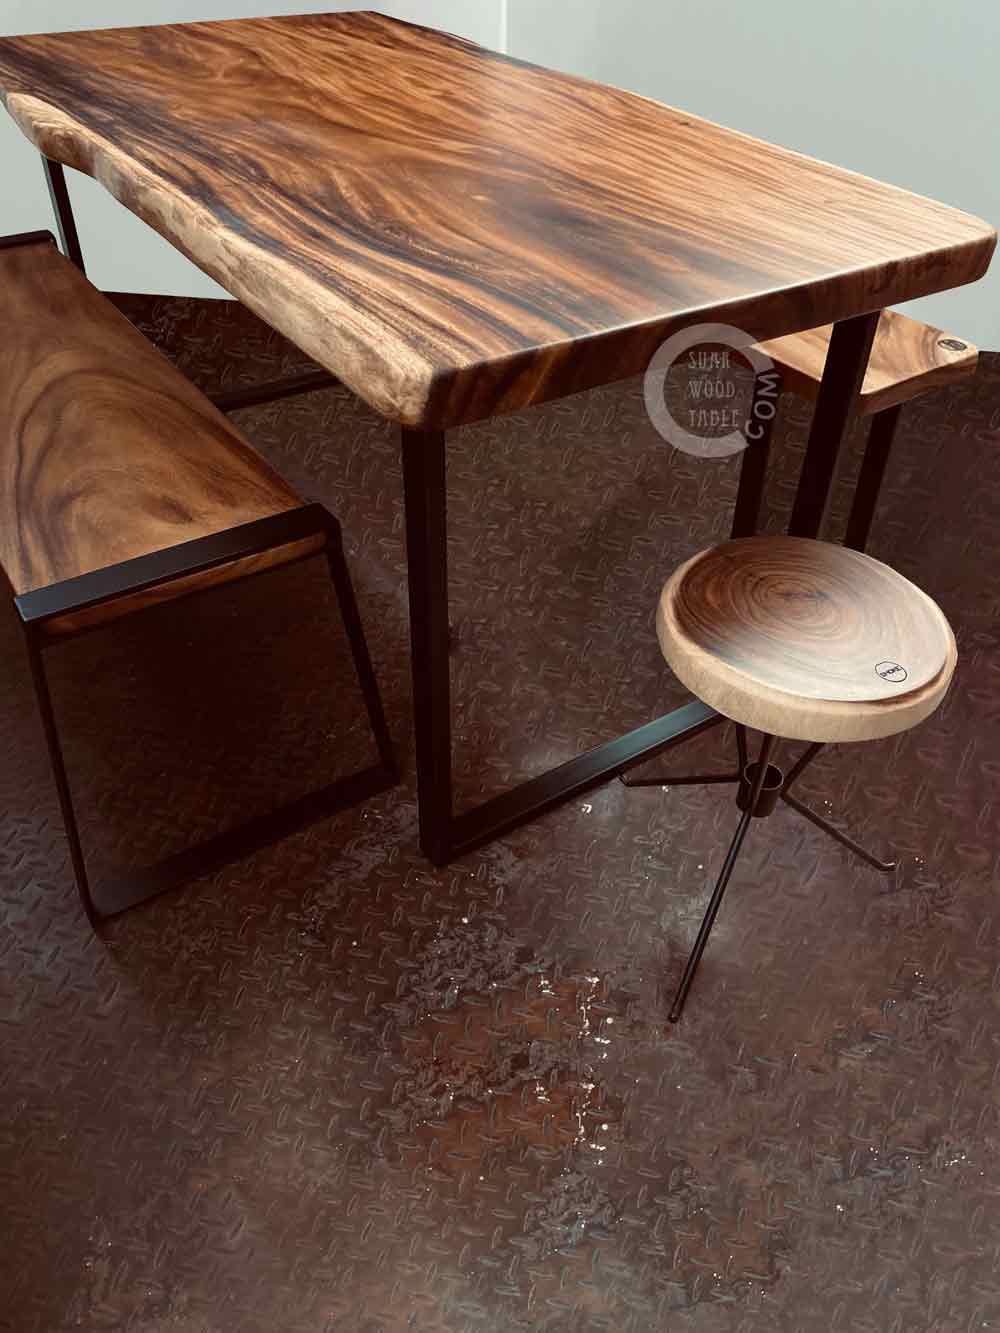 natural edge south american walnut table